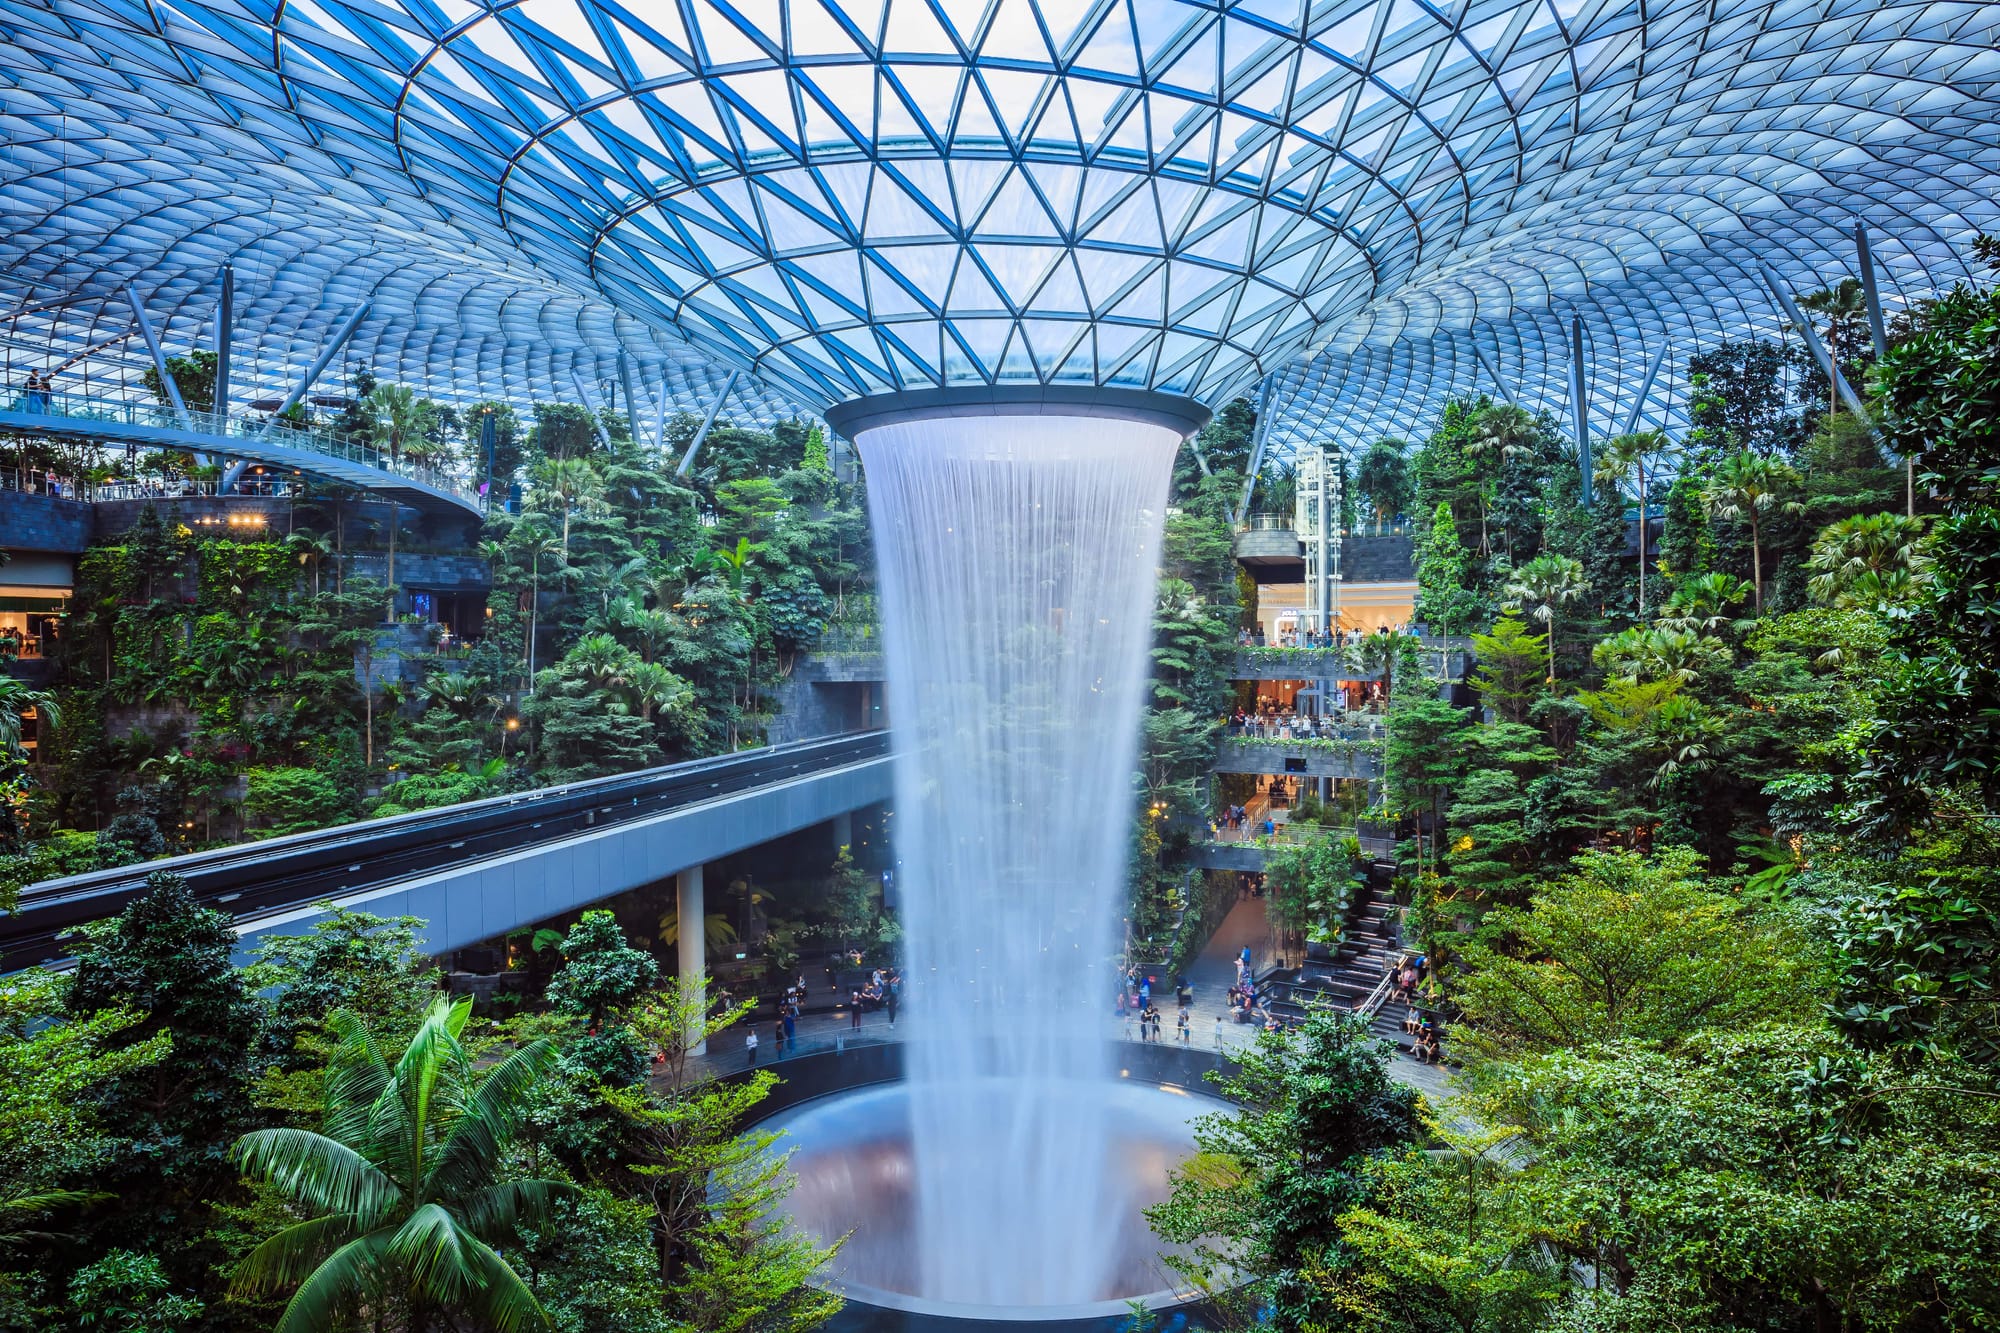 Singapore Changi Airport - The Tallest Indoor Waterfall In The World